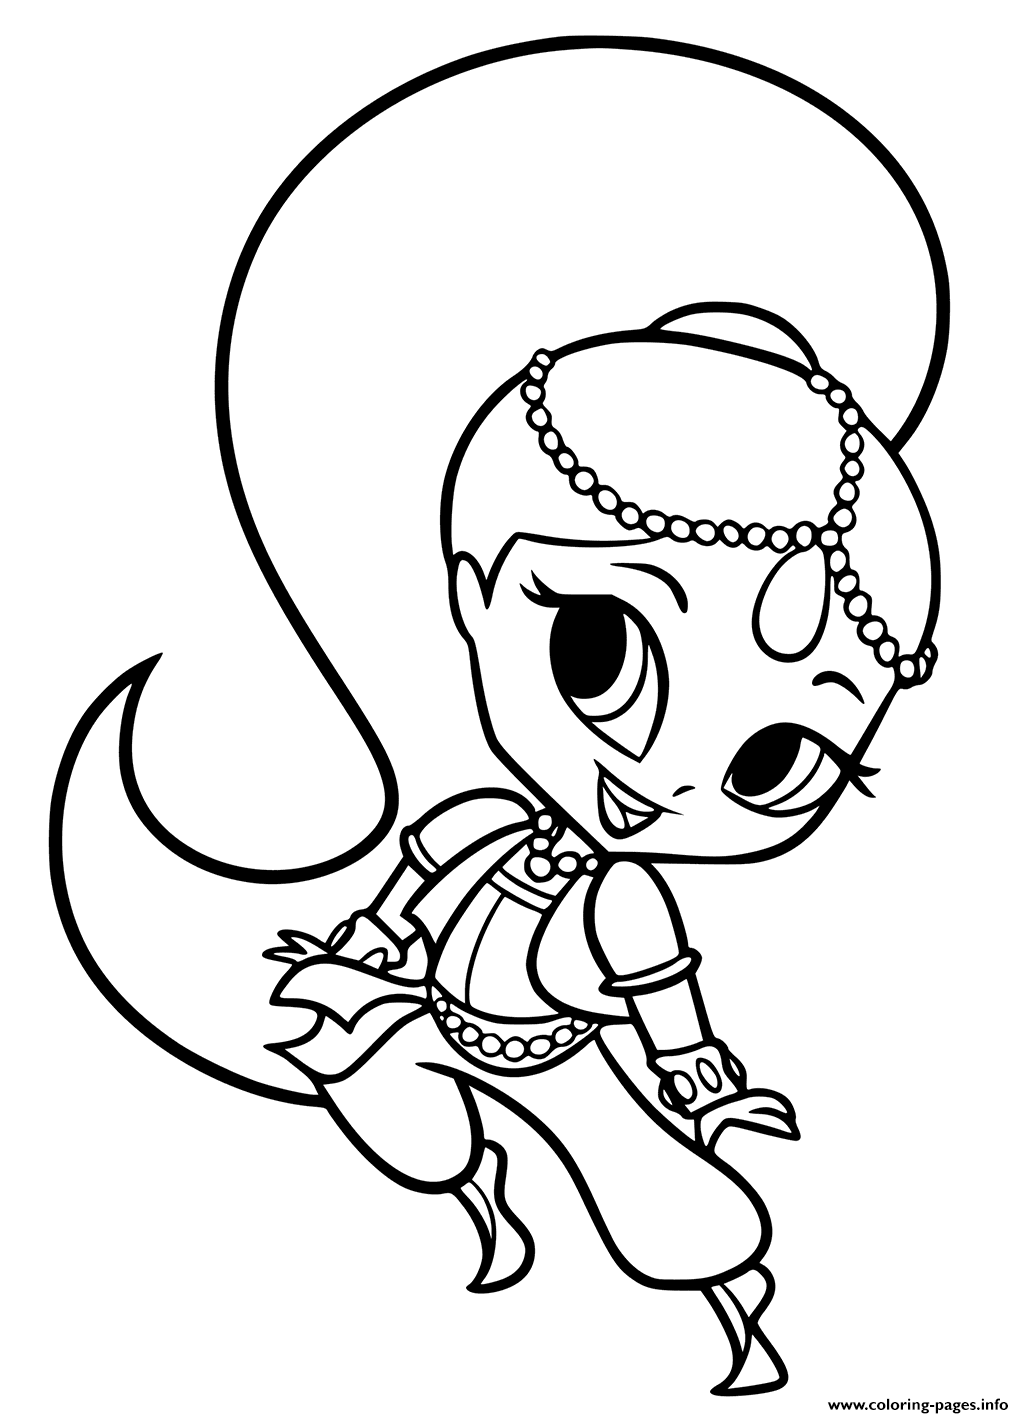 Coloring pages ideas : Coloring Pages Ideas Shimmer And ...